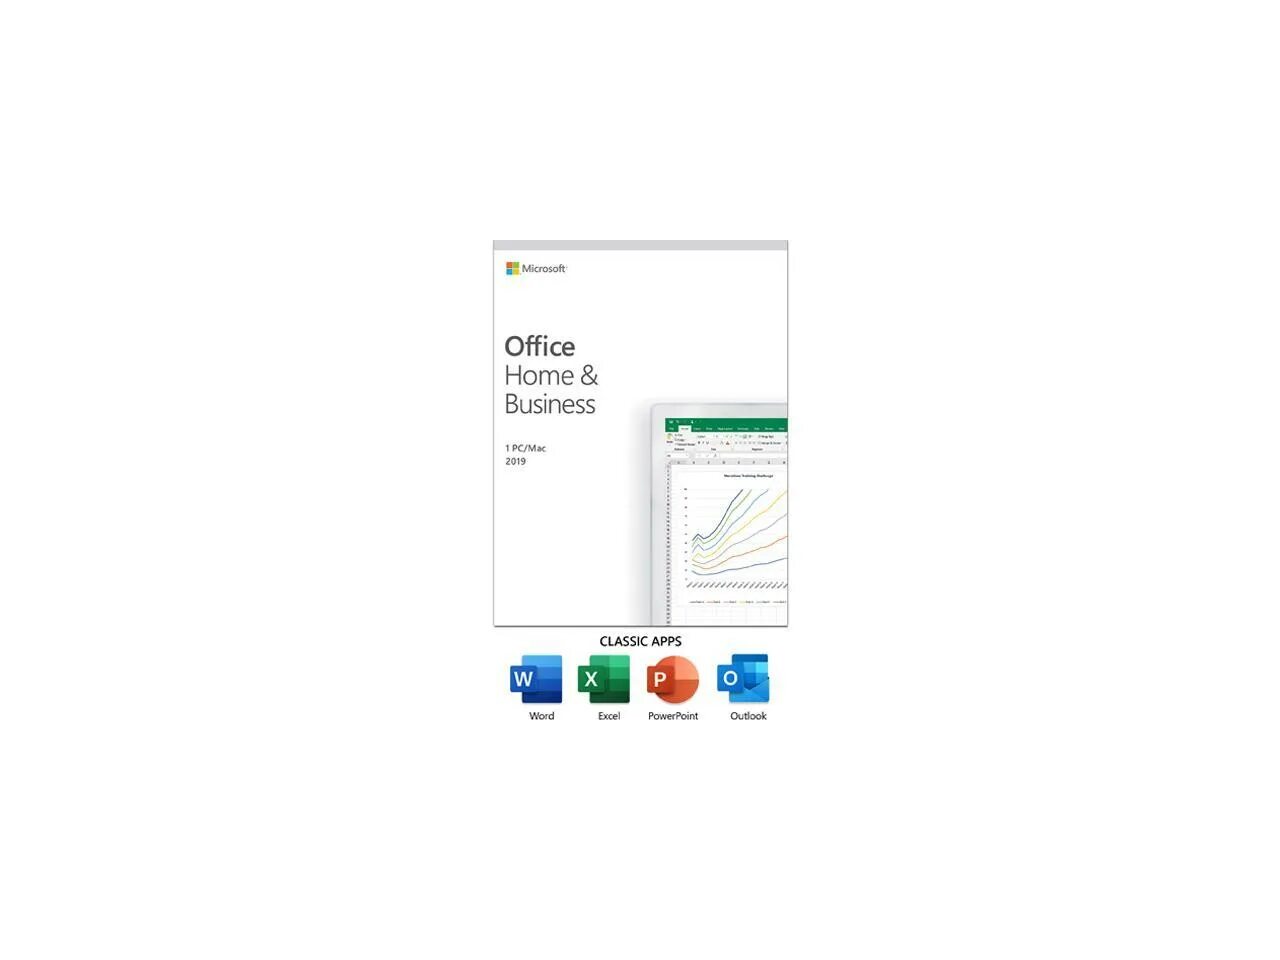 Microsoft Office 2019 Home and Business. Microsoft Office 2019 Home and Business, Box. Office 2021 Home and Business Mac. Office 2019 Home and Business Mac.